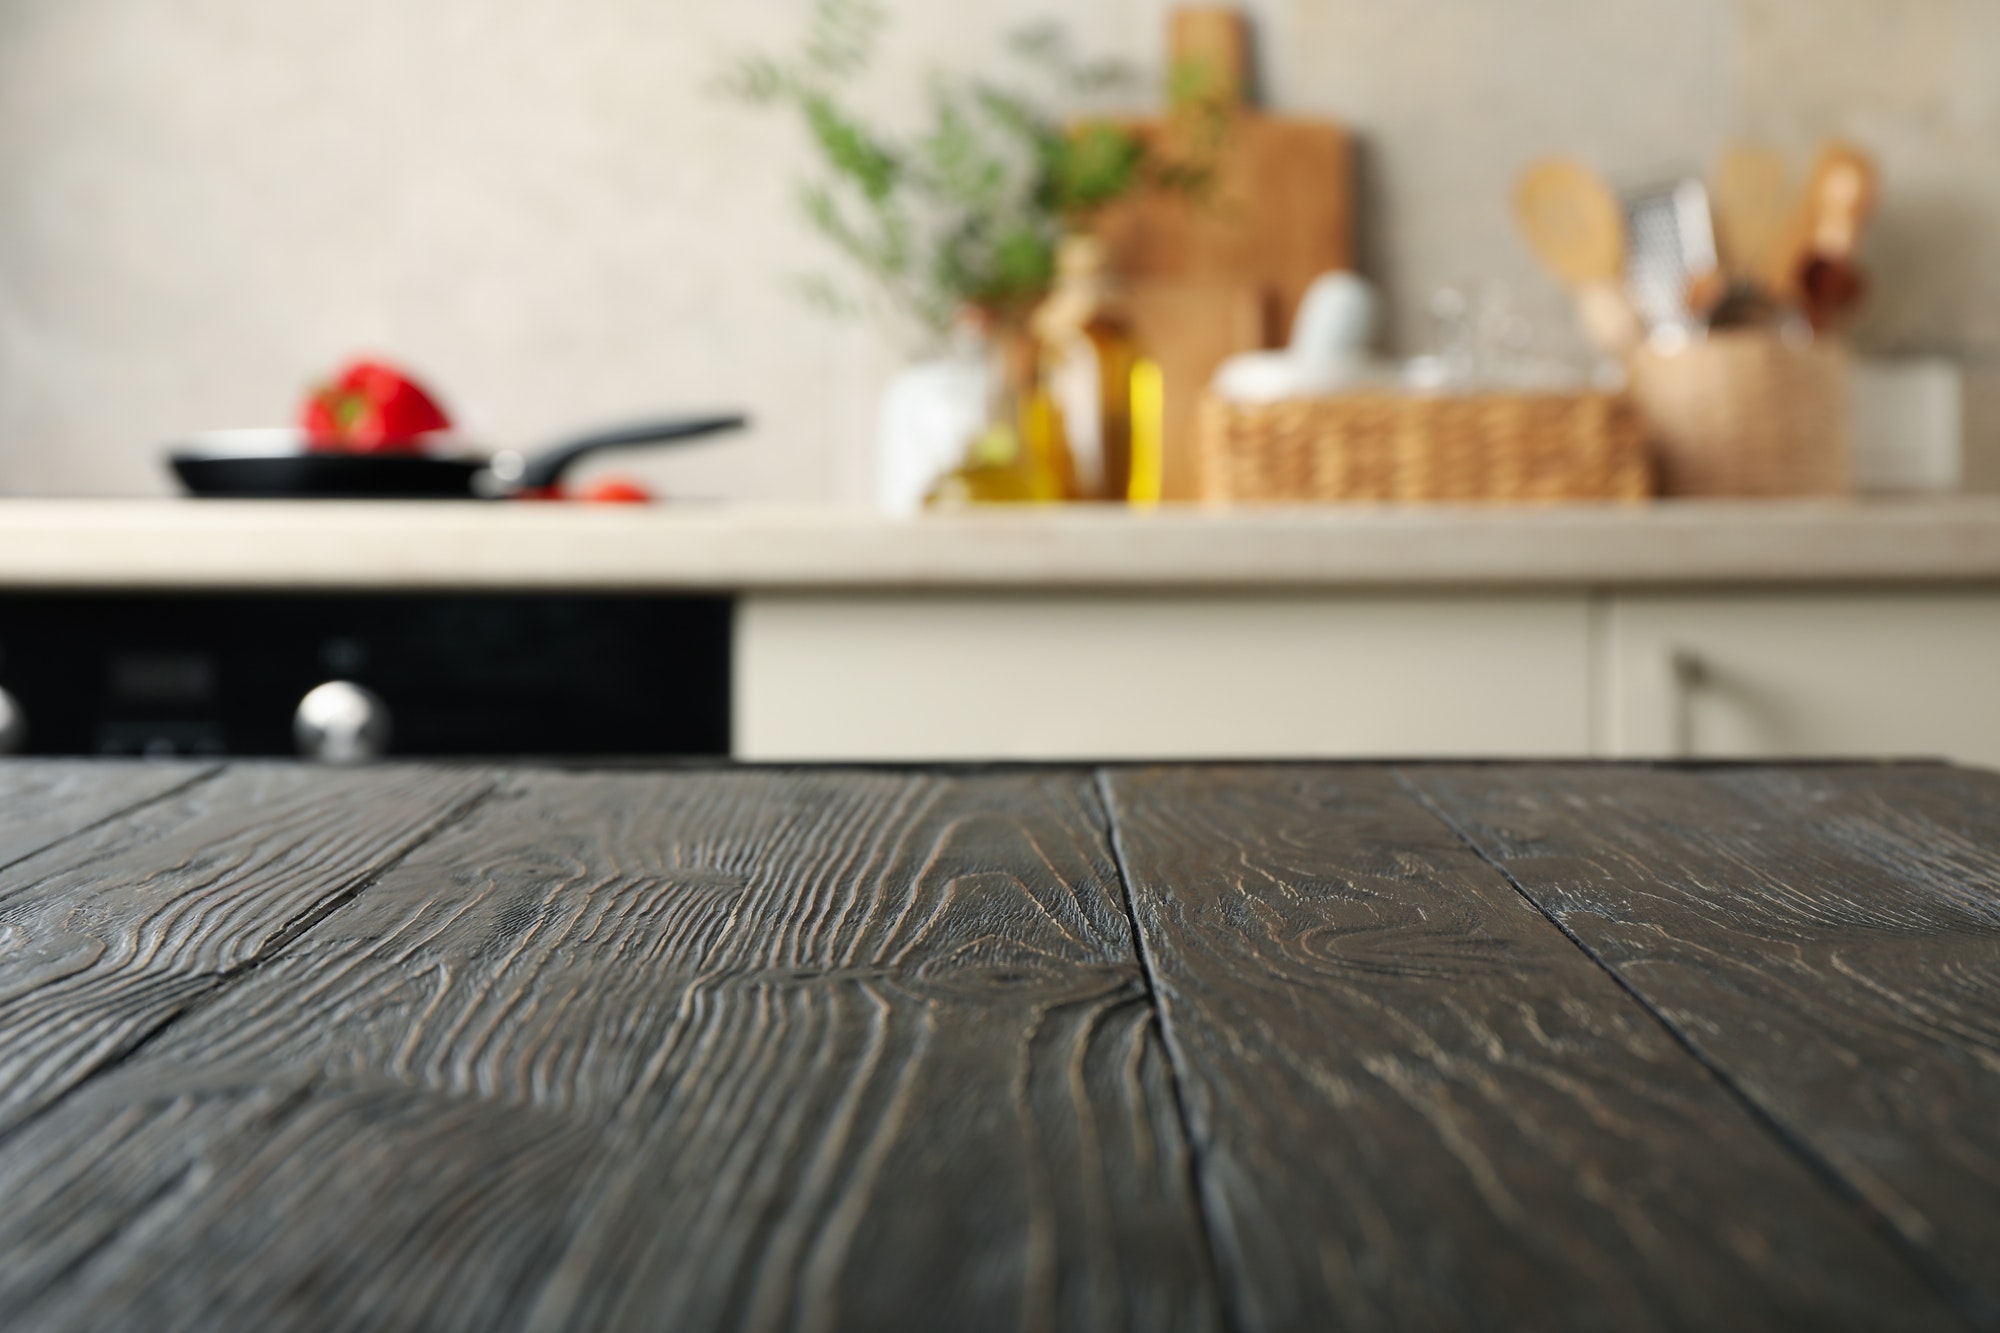 Wood table on blur kitchen room background